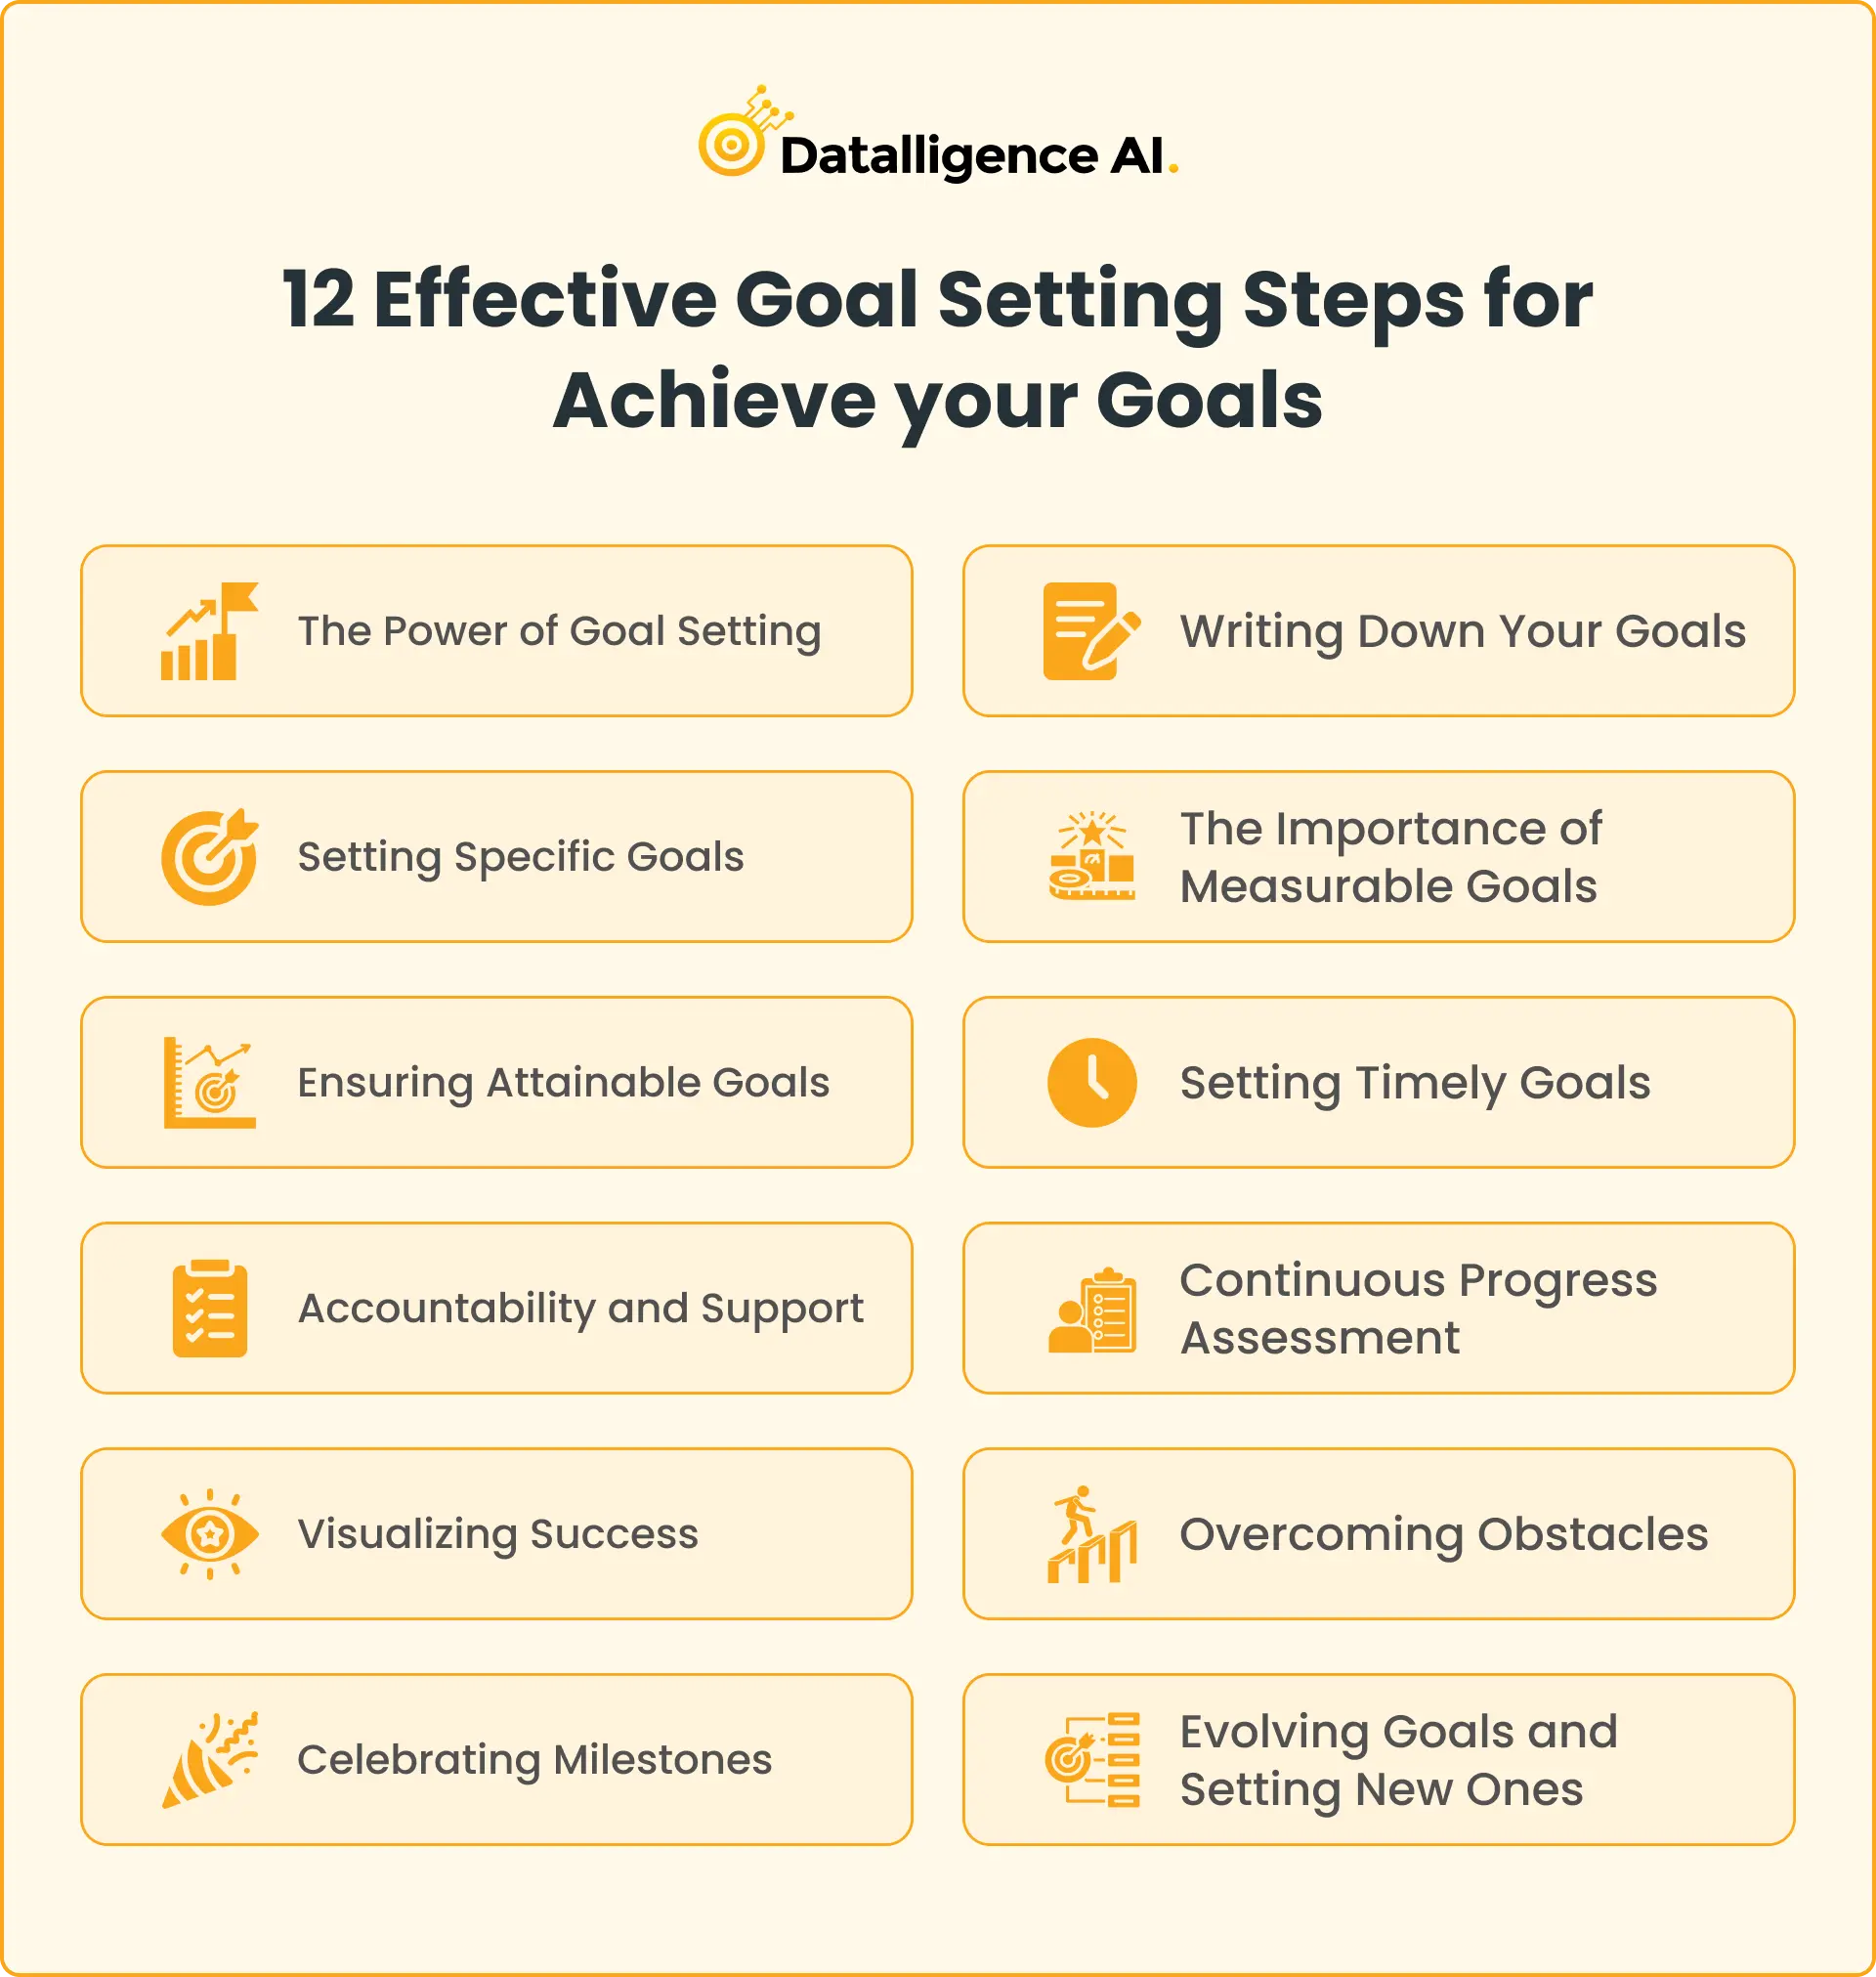 12 Effective Goal-Setting Steps for Achieving your Goals